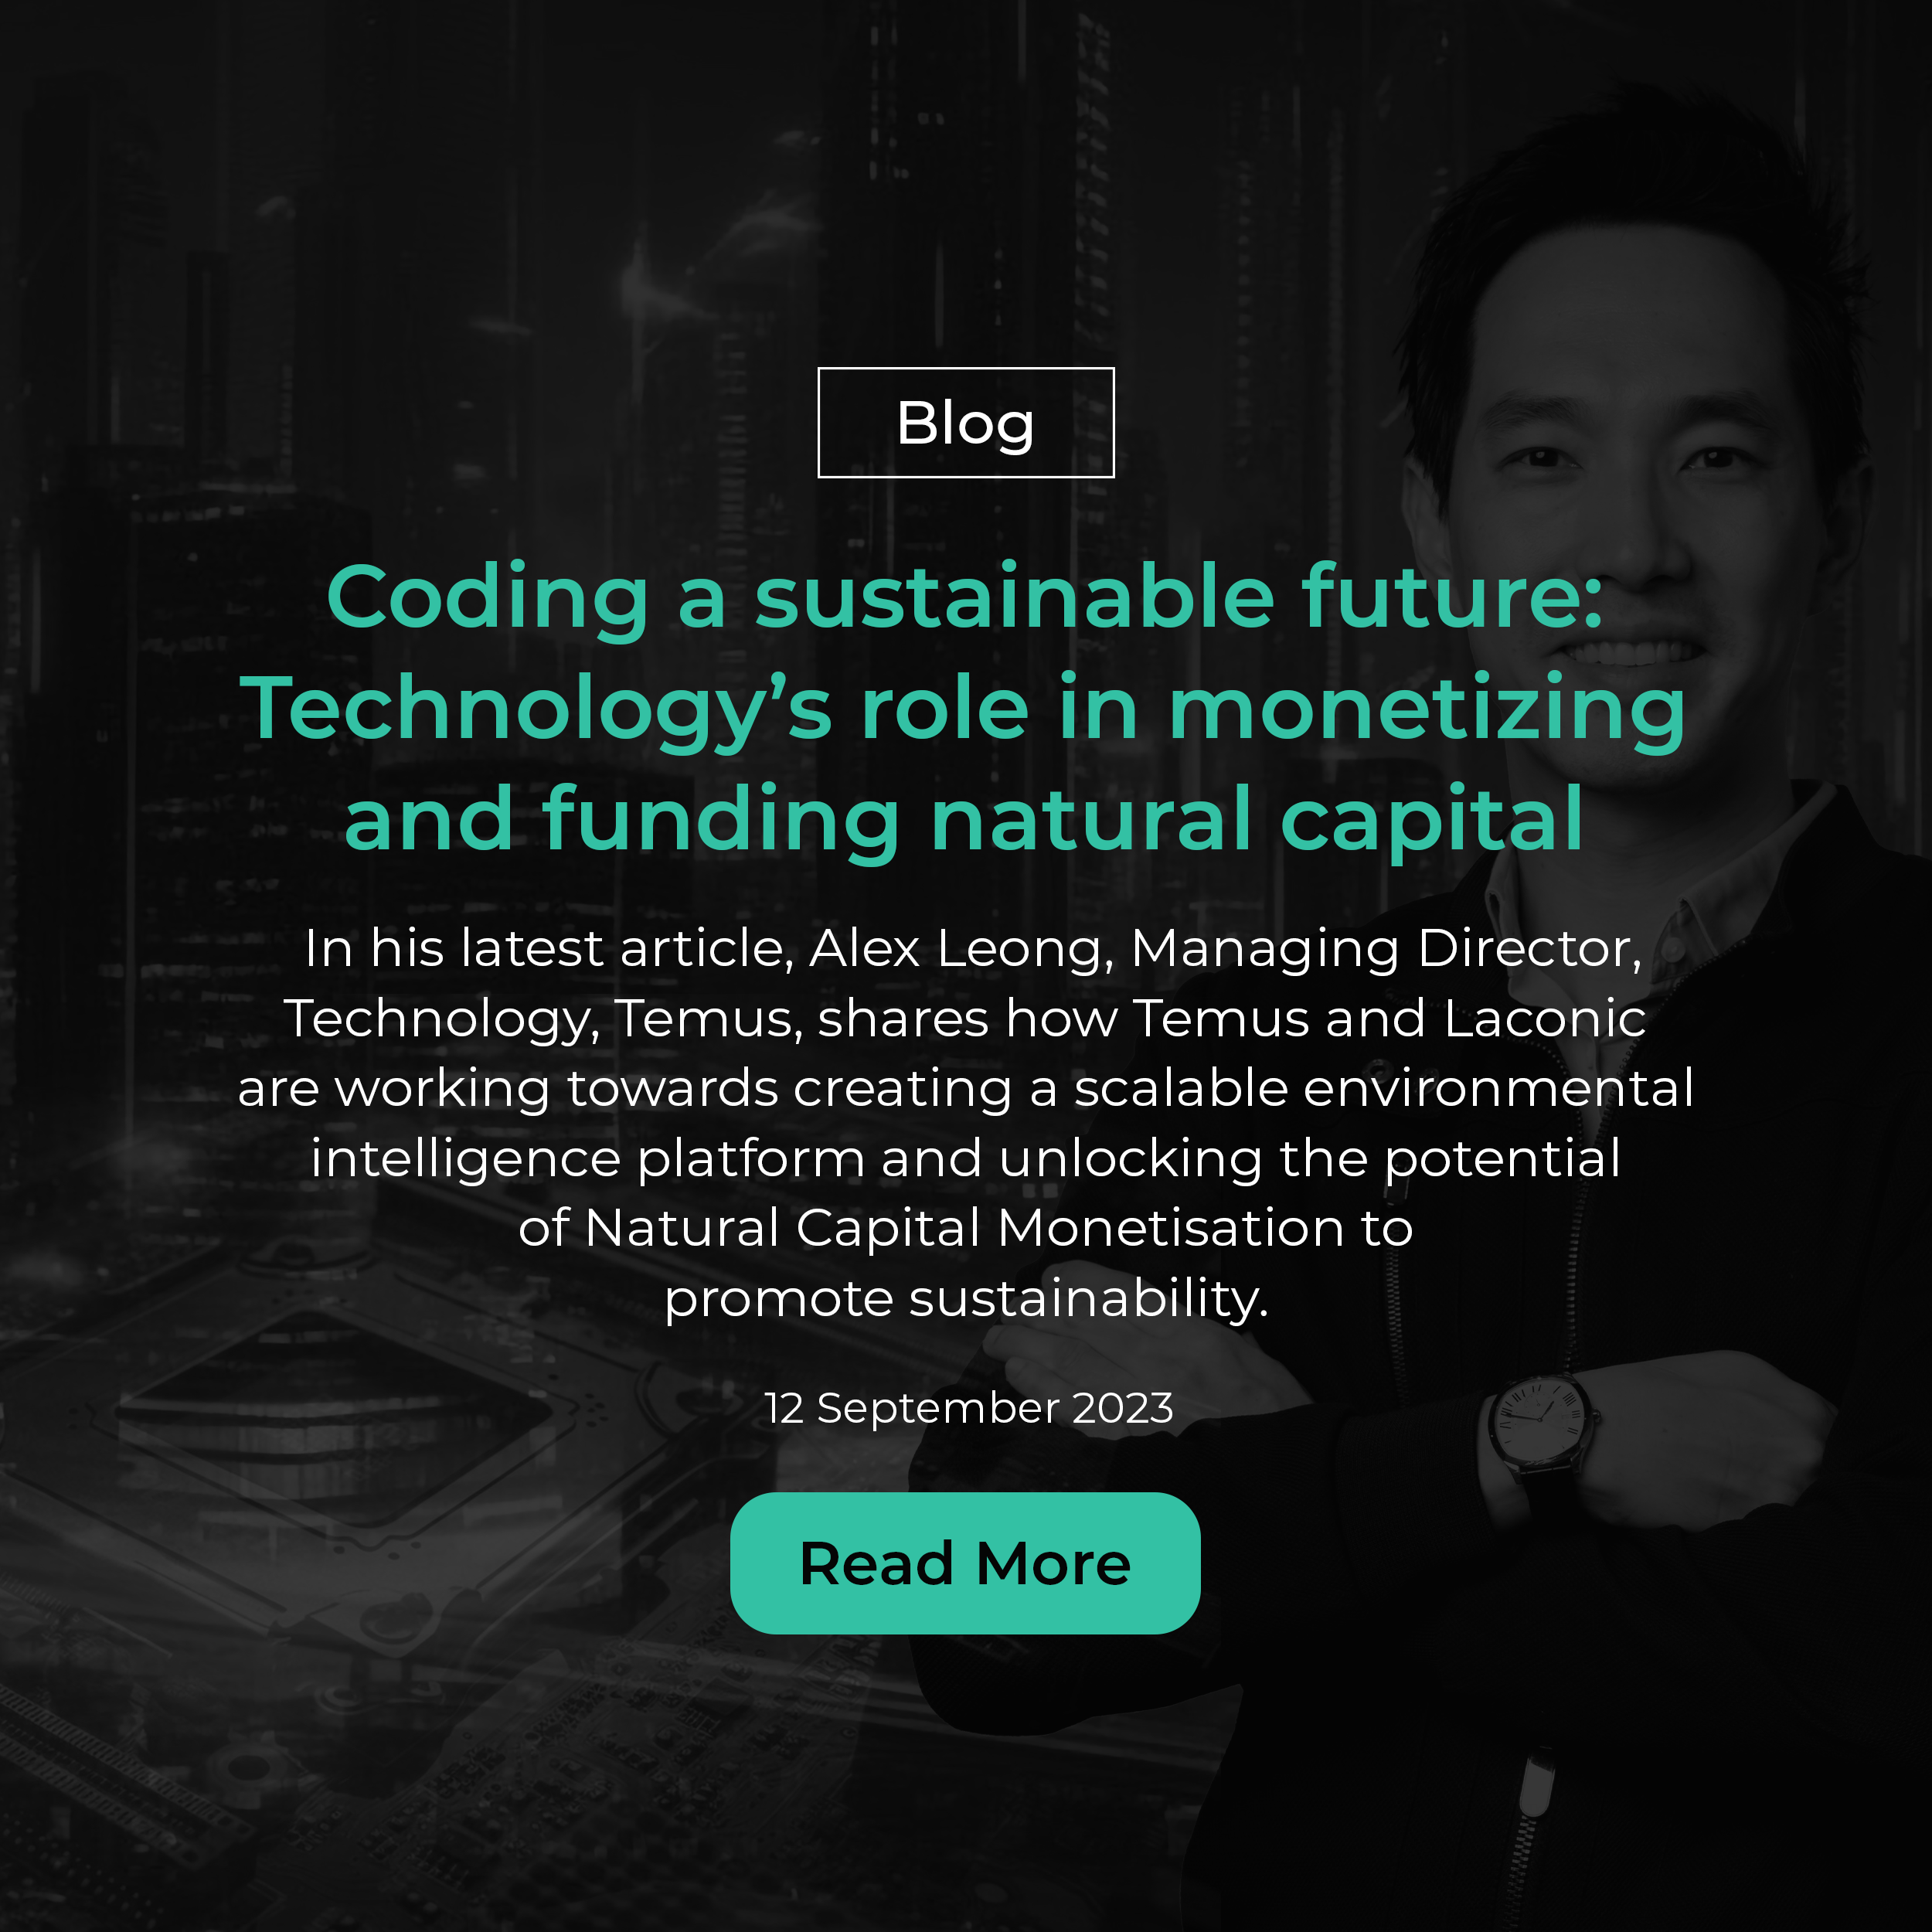 Coding a Sustainable Future: Technology's Role in Monetizing and Funding Natural Capital